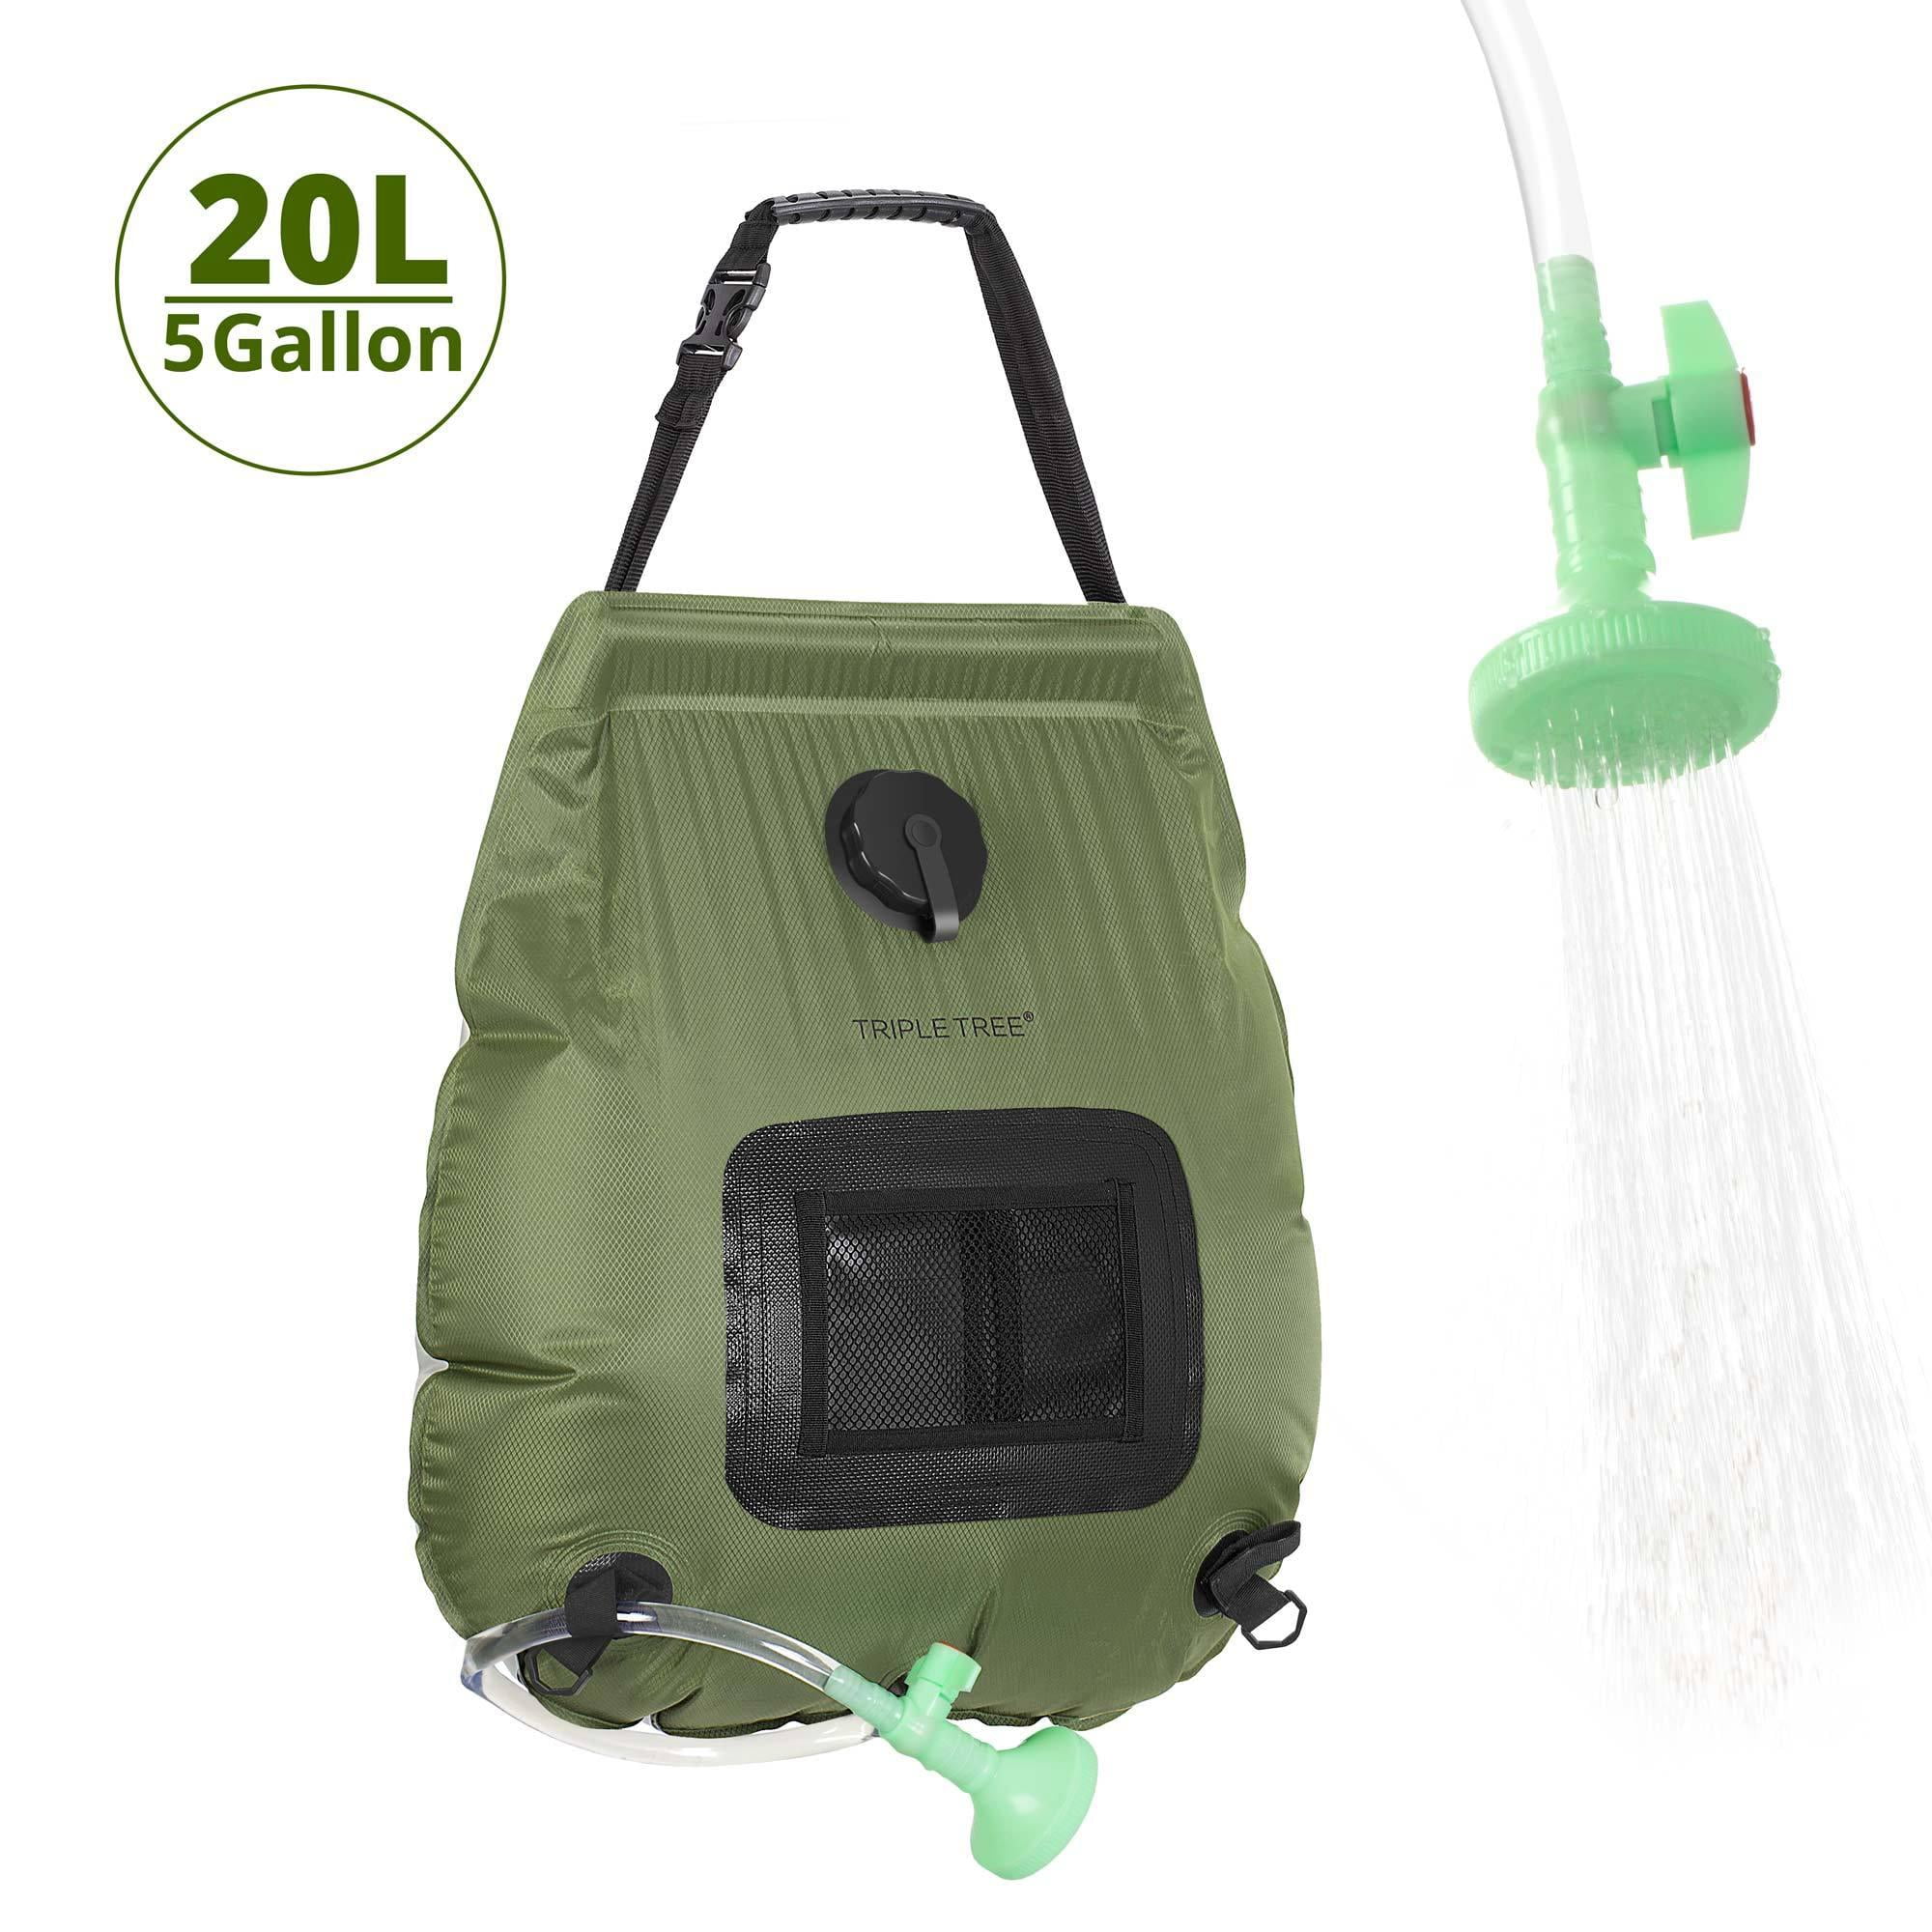 20L Camping Shower Bag Outdoor Hiking Portable Solar Heating Water Shower Bag 